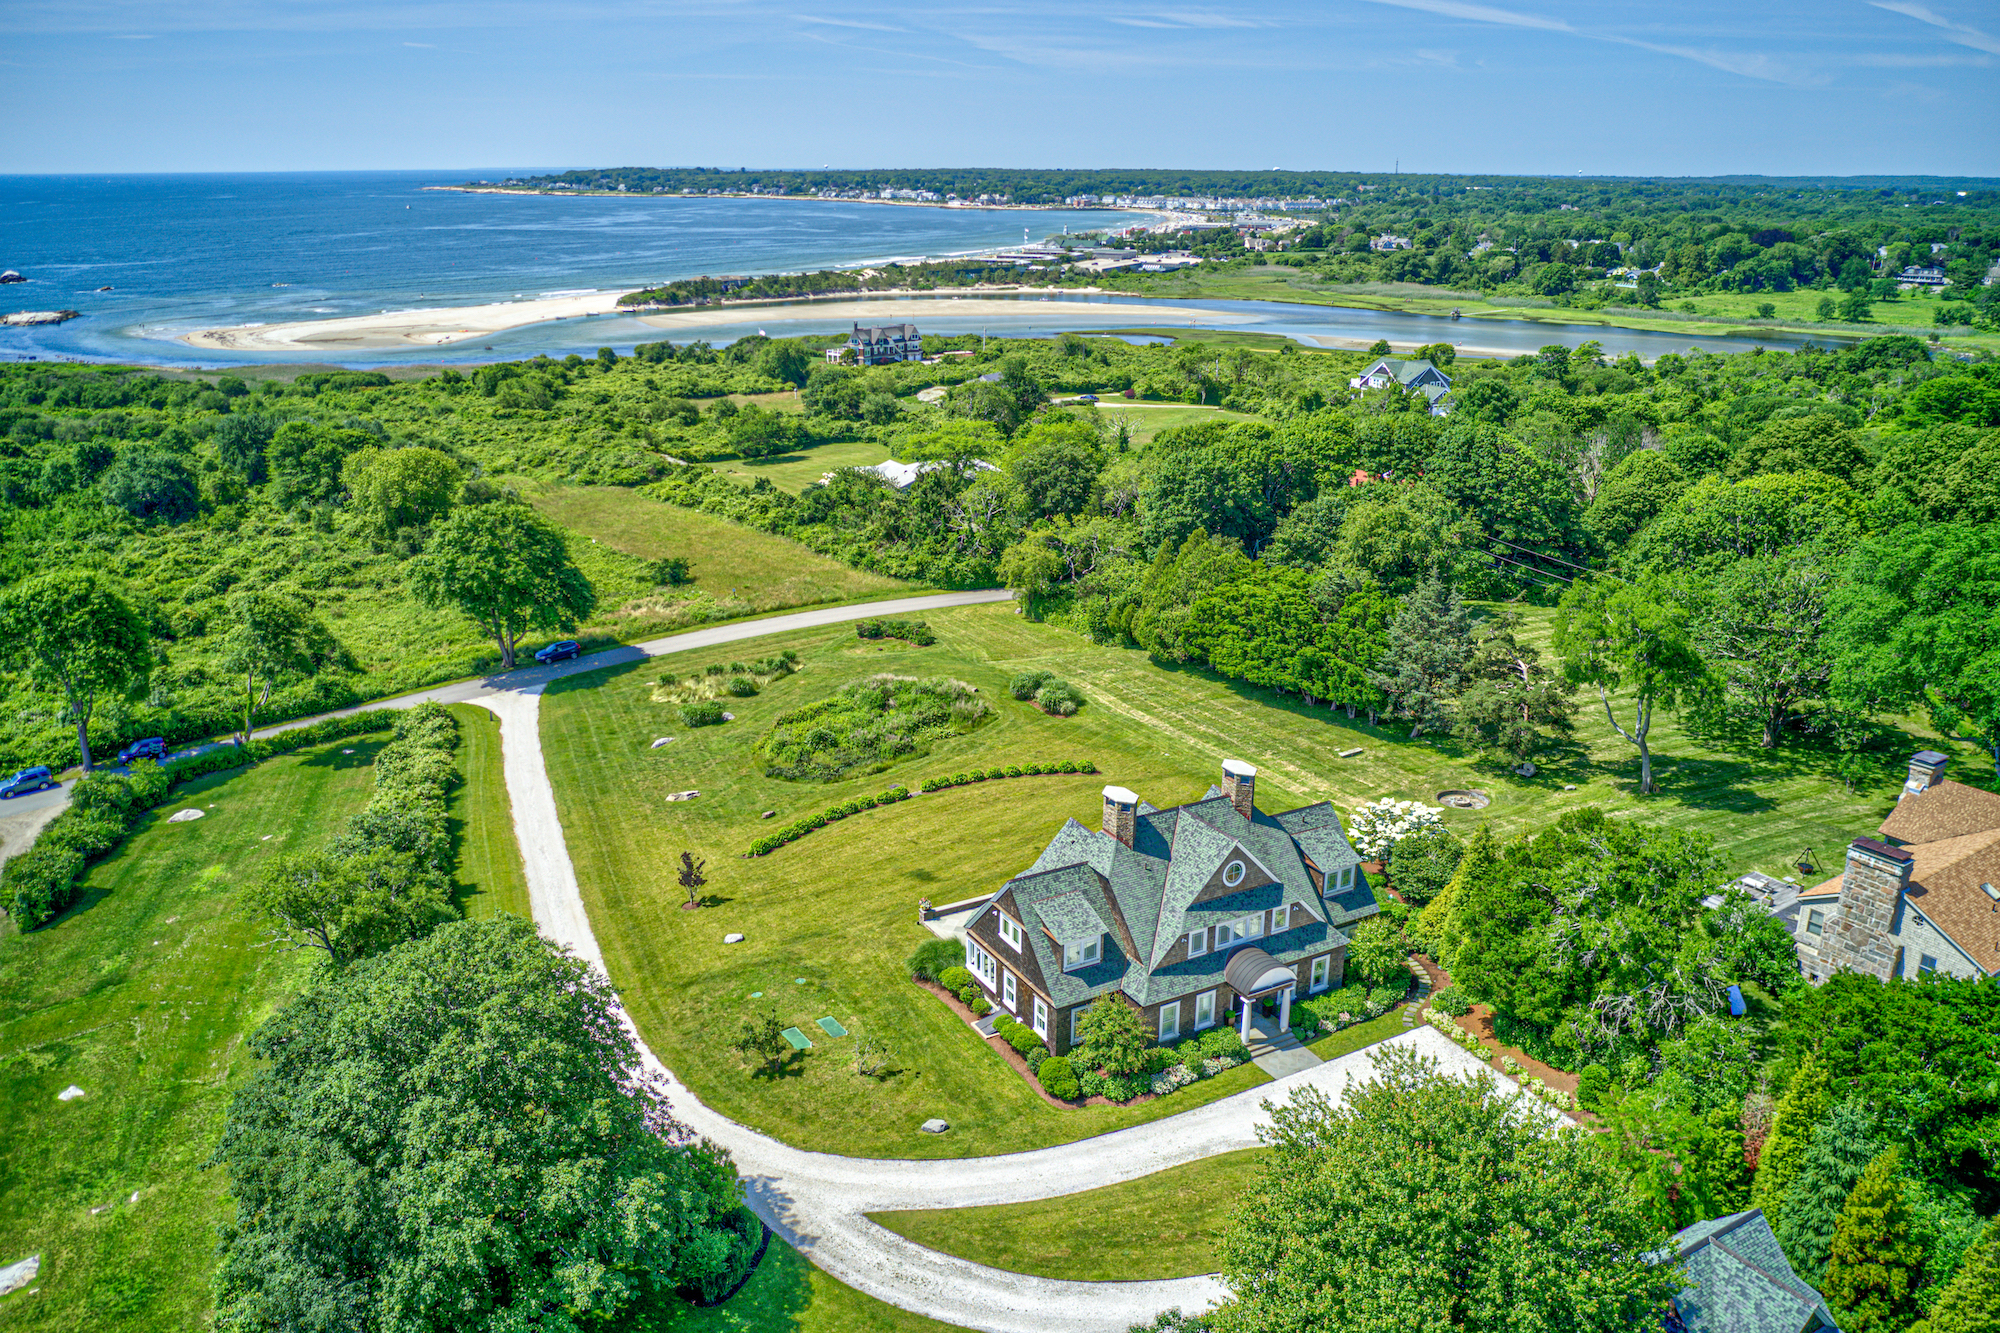 THE 2-ACRE property features views of the Atlantic Ocean. / COURTESY RESIDENTIAL PROPERTIES LTD.